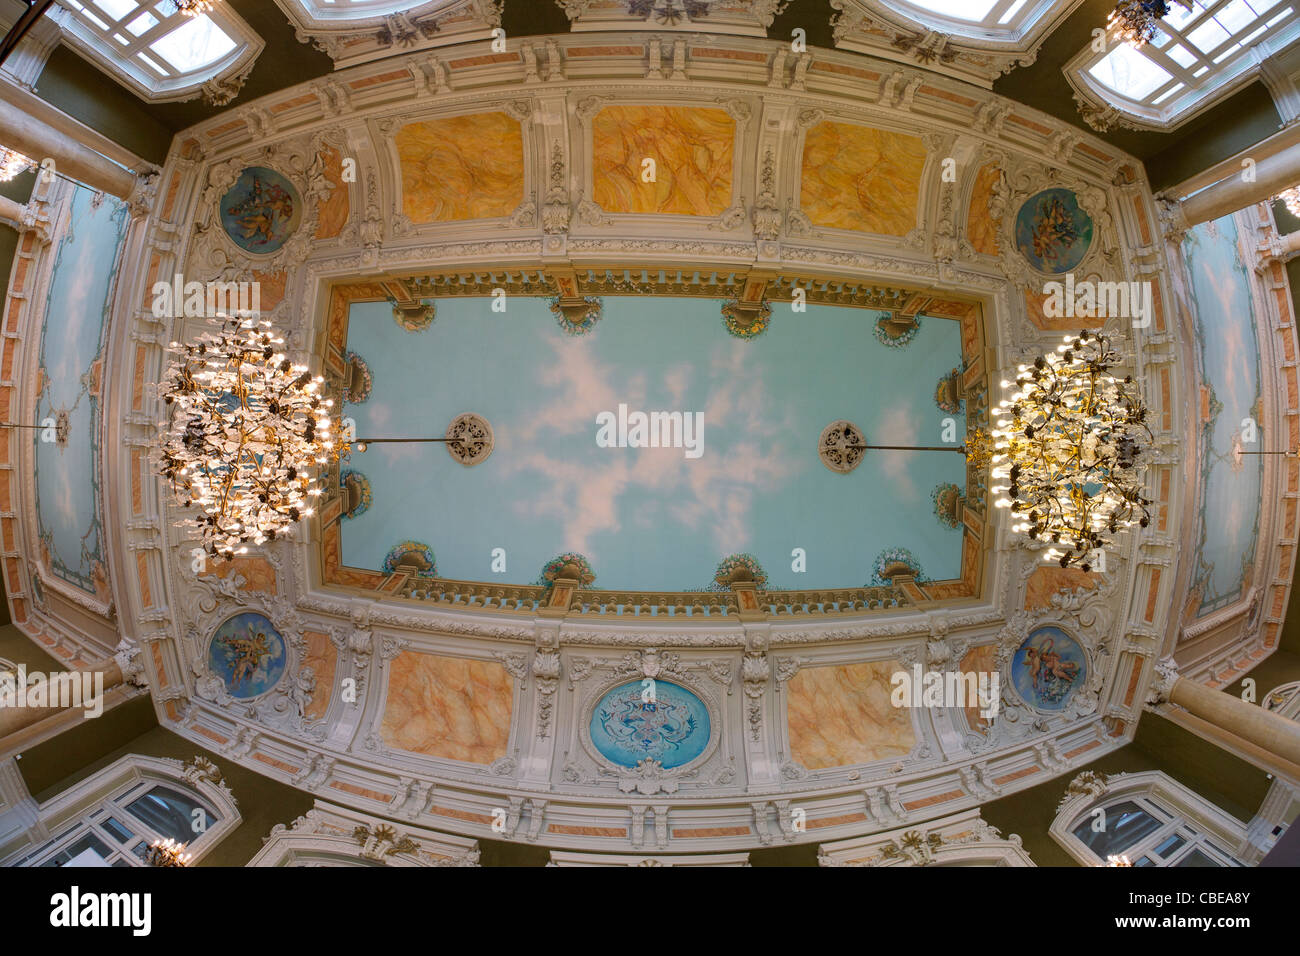 In the Vichy's opera house, the trompe-l'oeil ceiling of the Napoleon III lounge (Congress Center - Vichy - Auvergne - France). Stock Photo